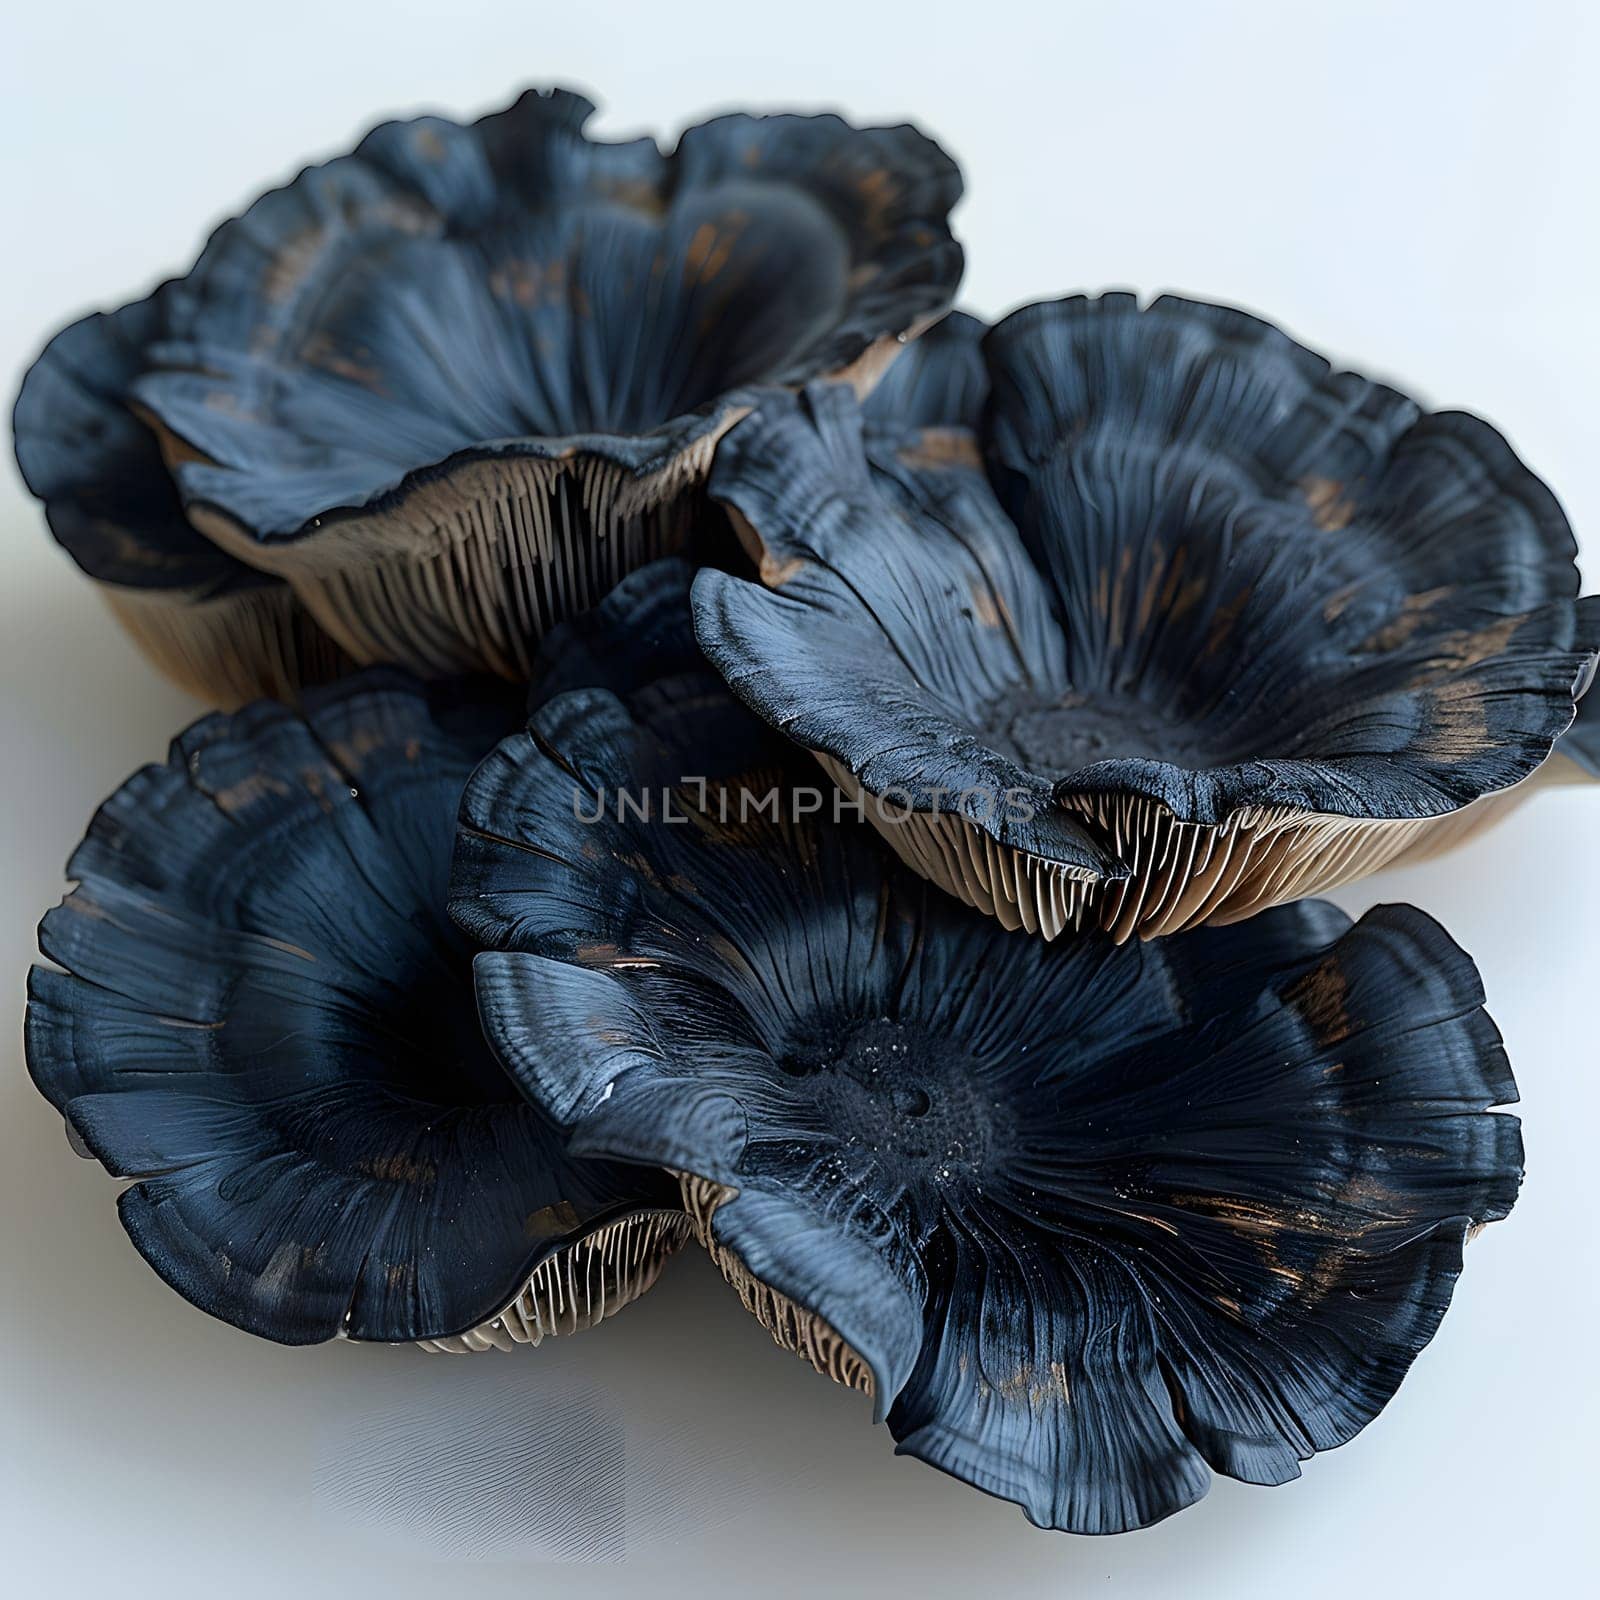 Electric blue invertebrate pattern on black flowers as a fashion accessory by Nadtochiy